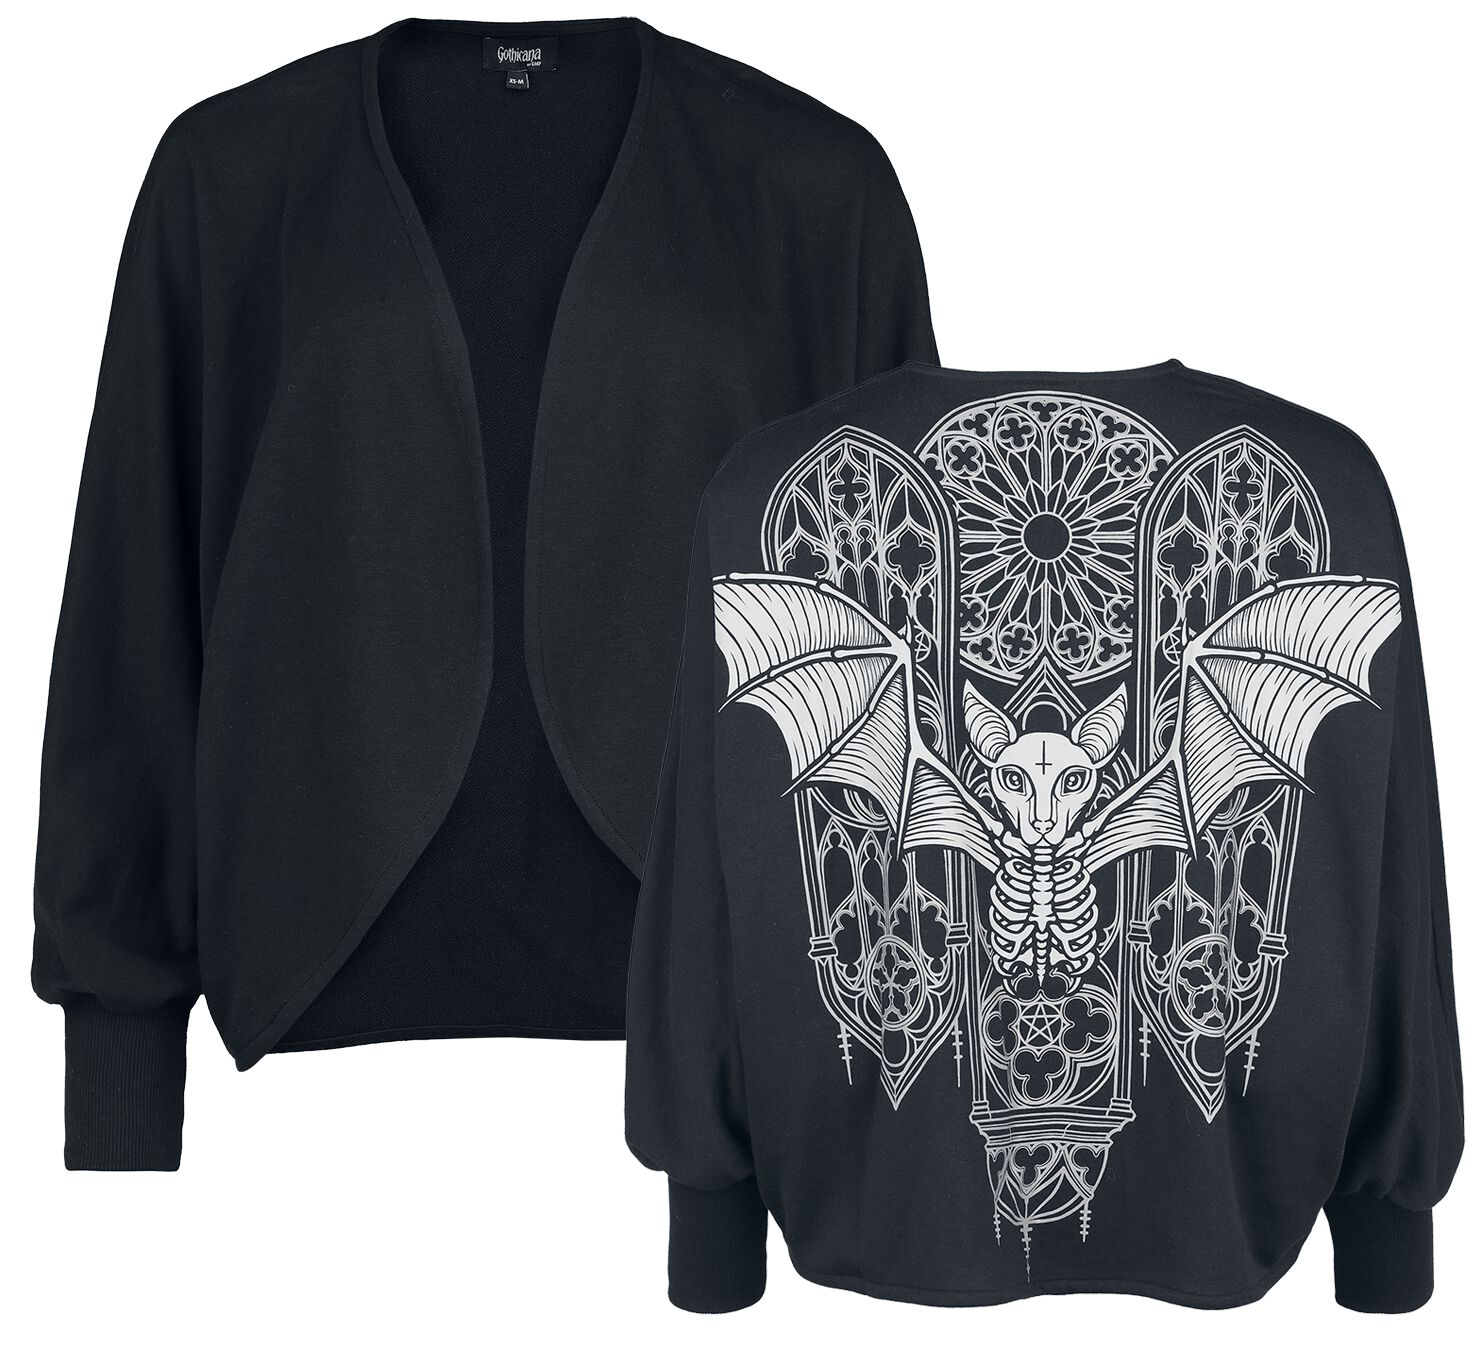 Gothicana by EMP Cardigan with Batwing Sleeves Cardigan schwarz in XS-M